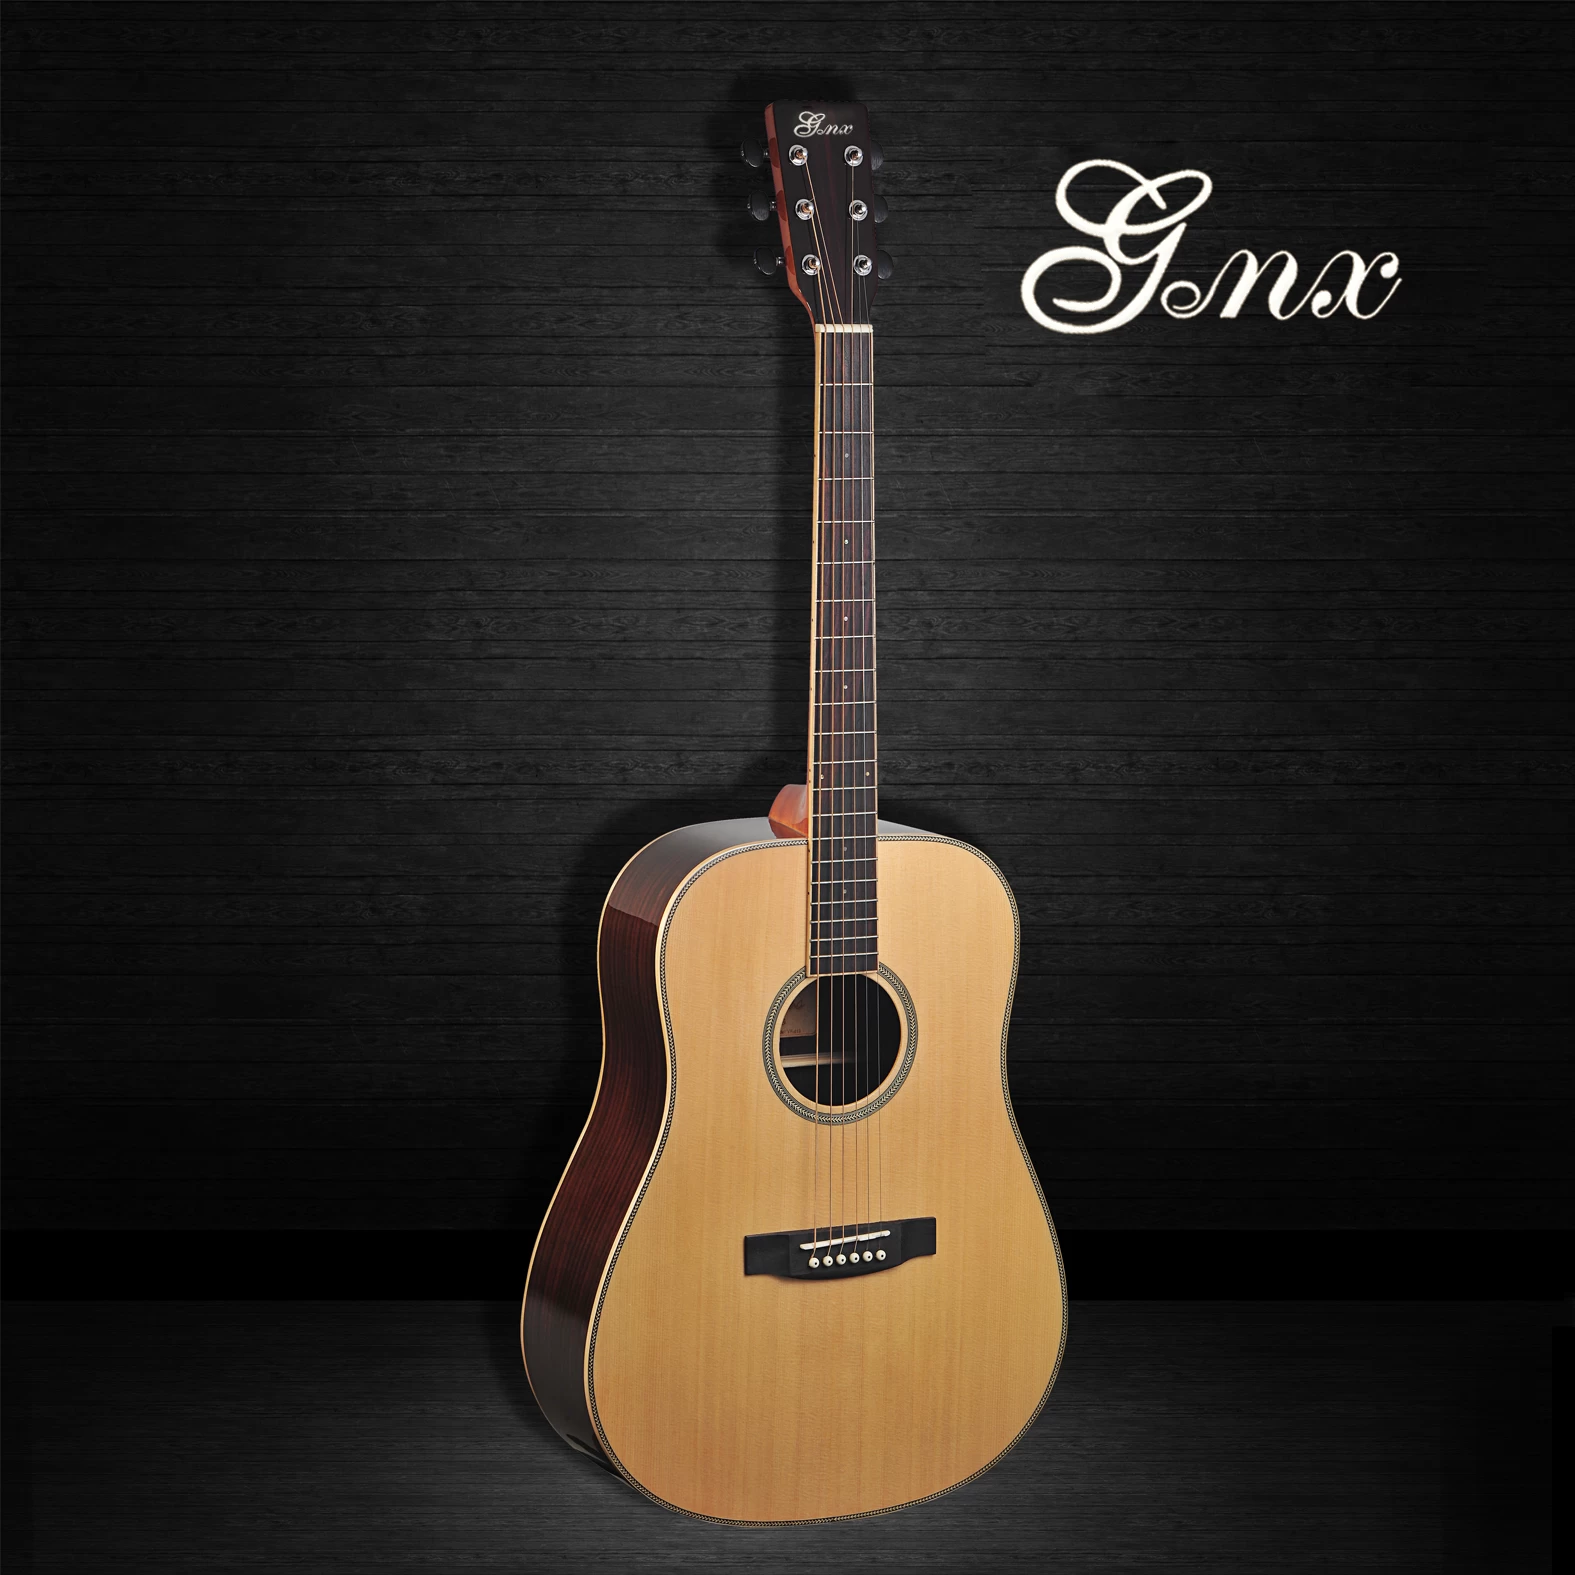 China wholesale musical instruments acoustic guitar manufacturer manufacturer